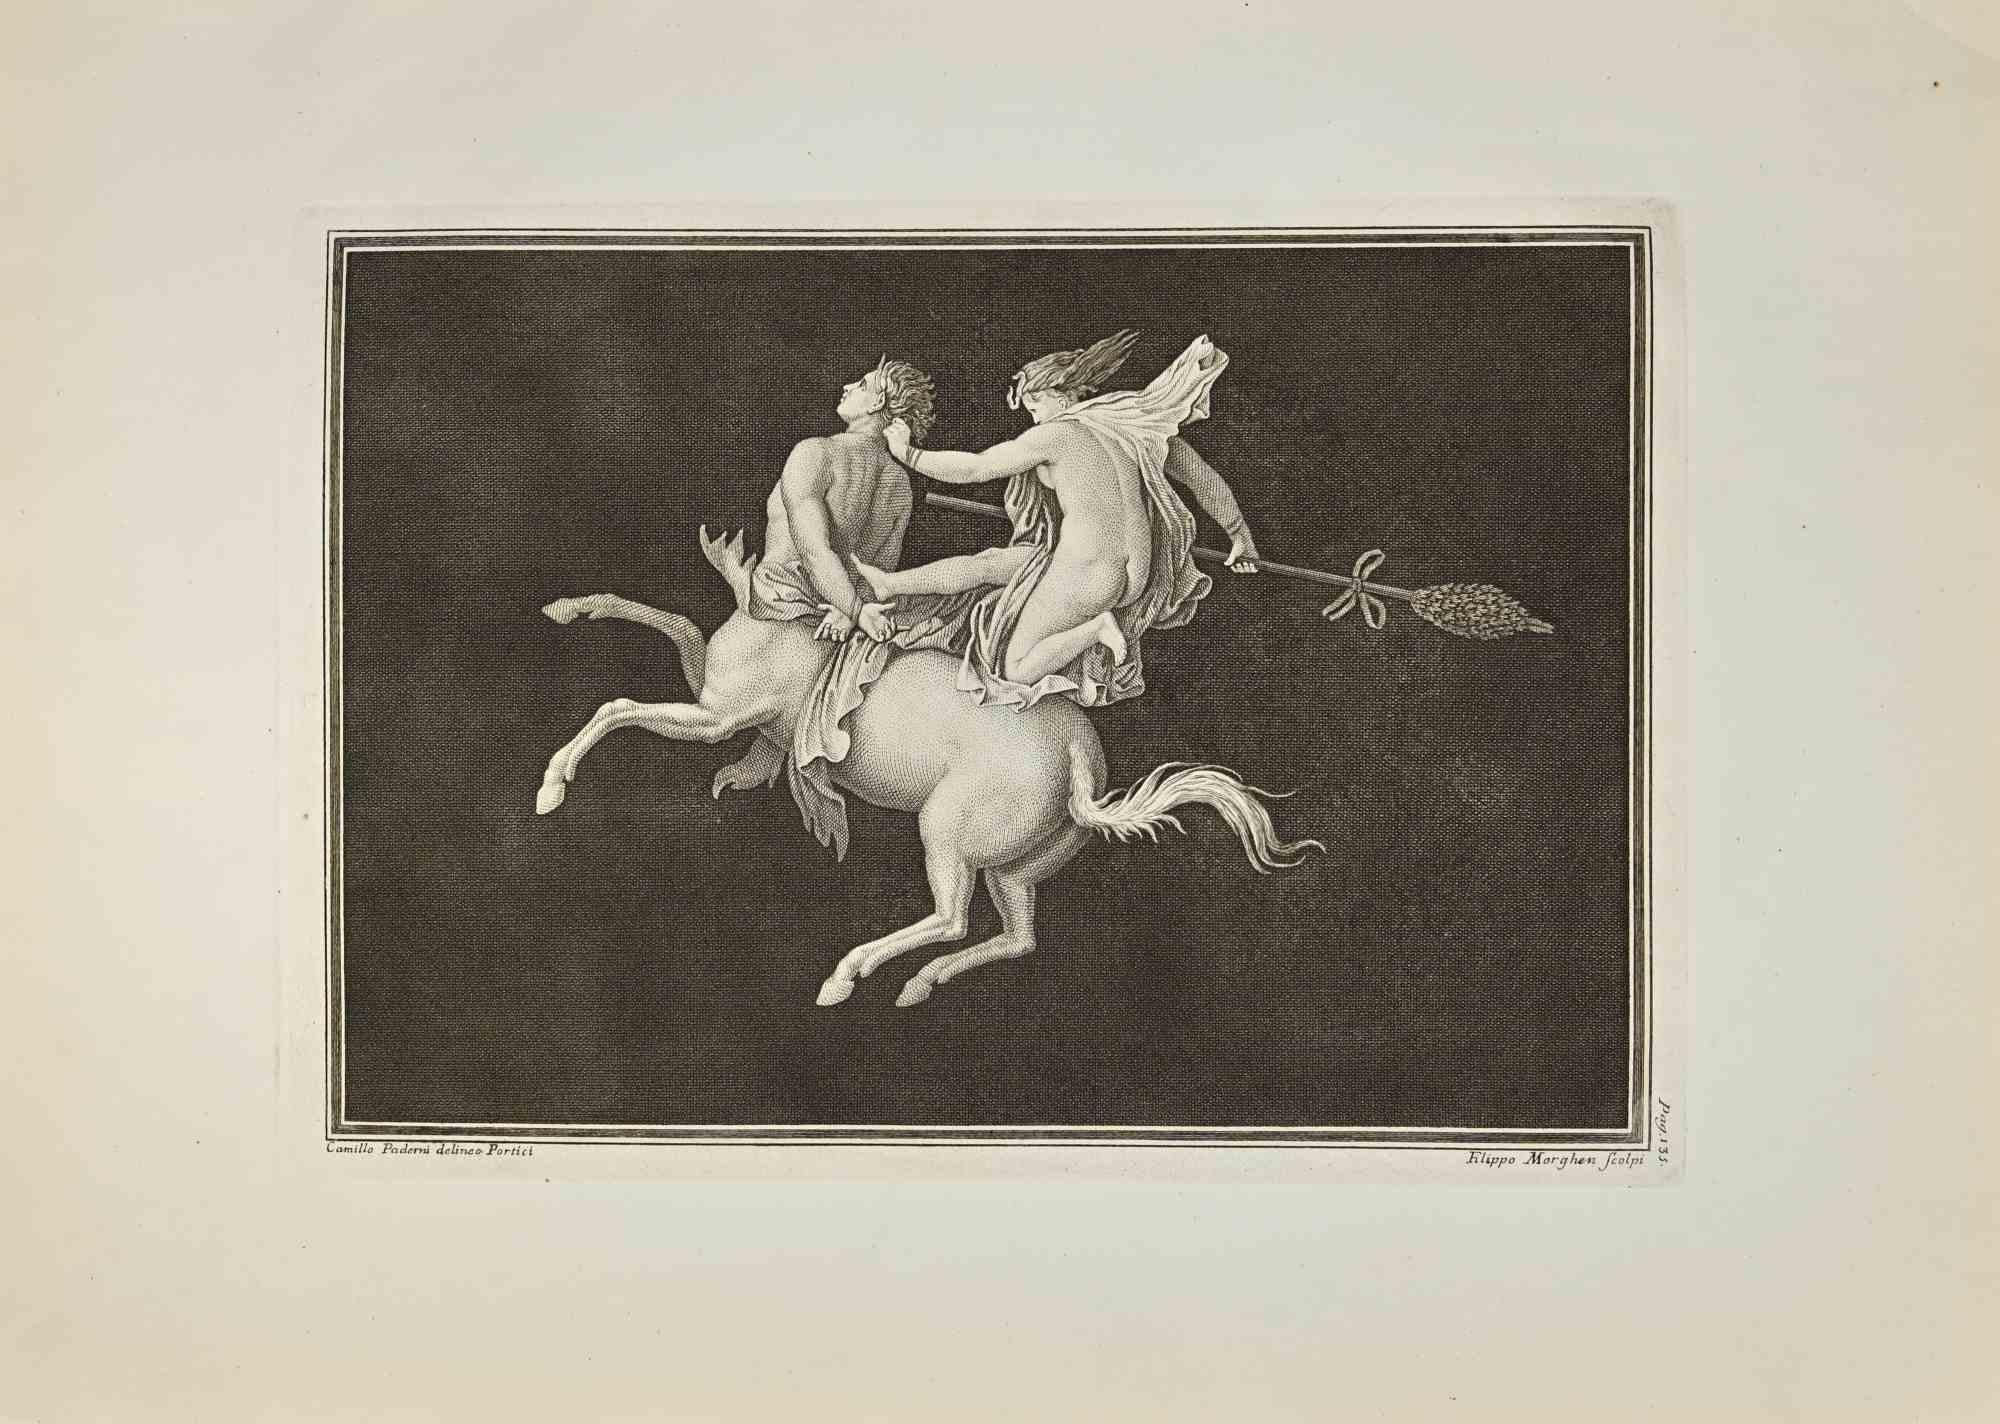 Heracles in Combat With Centaur from "Antiquities of Herculaneum" is an etching on paper realized by Filippo Morghen after Camillus Paderni in the 18th Century.

Signed on the plate.

Good conditions and aged margins.

The etching belongs to the